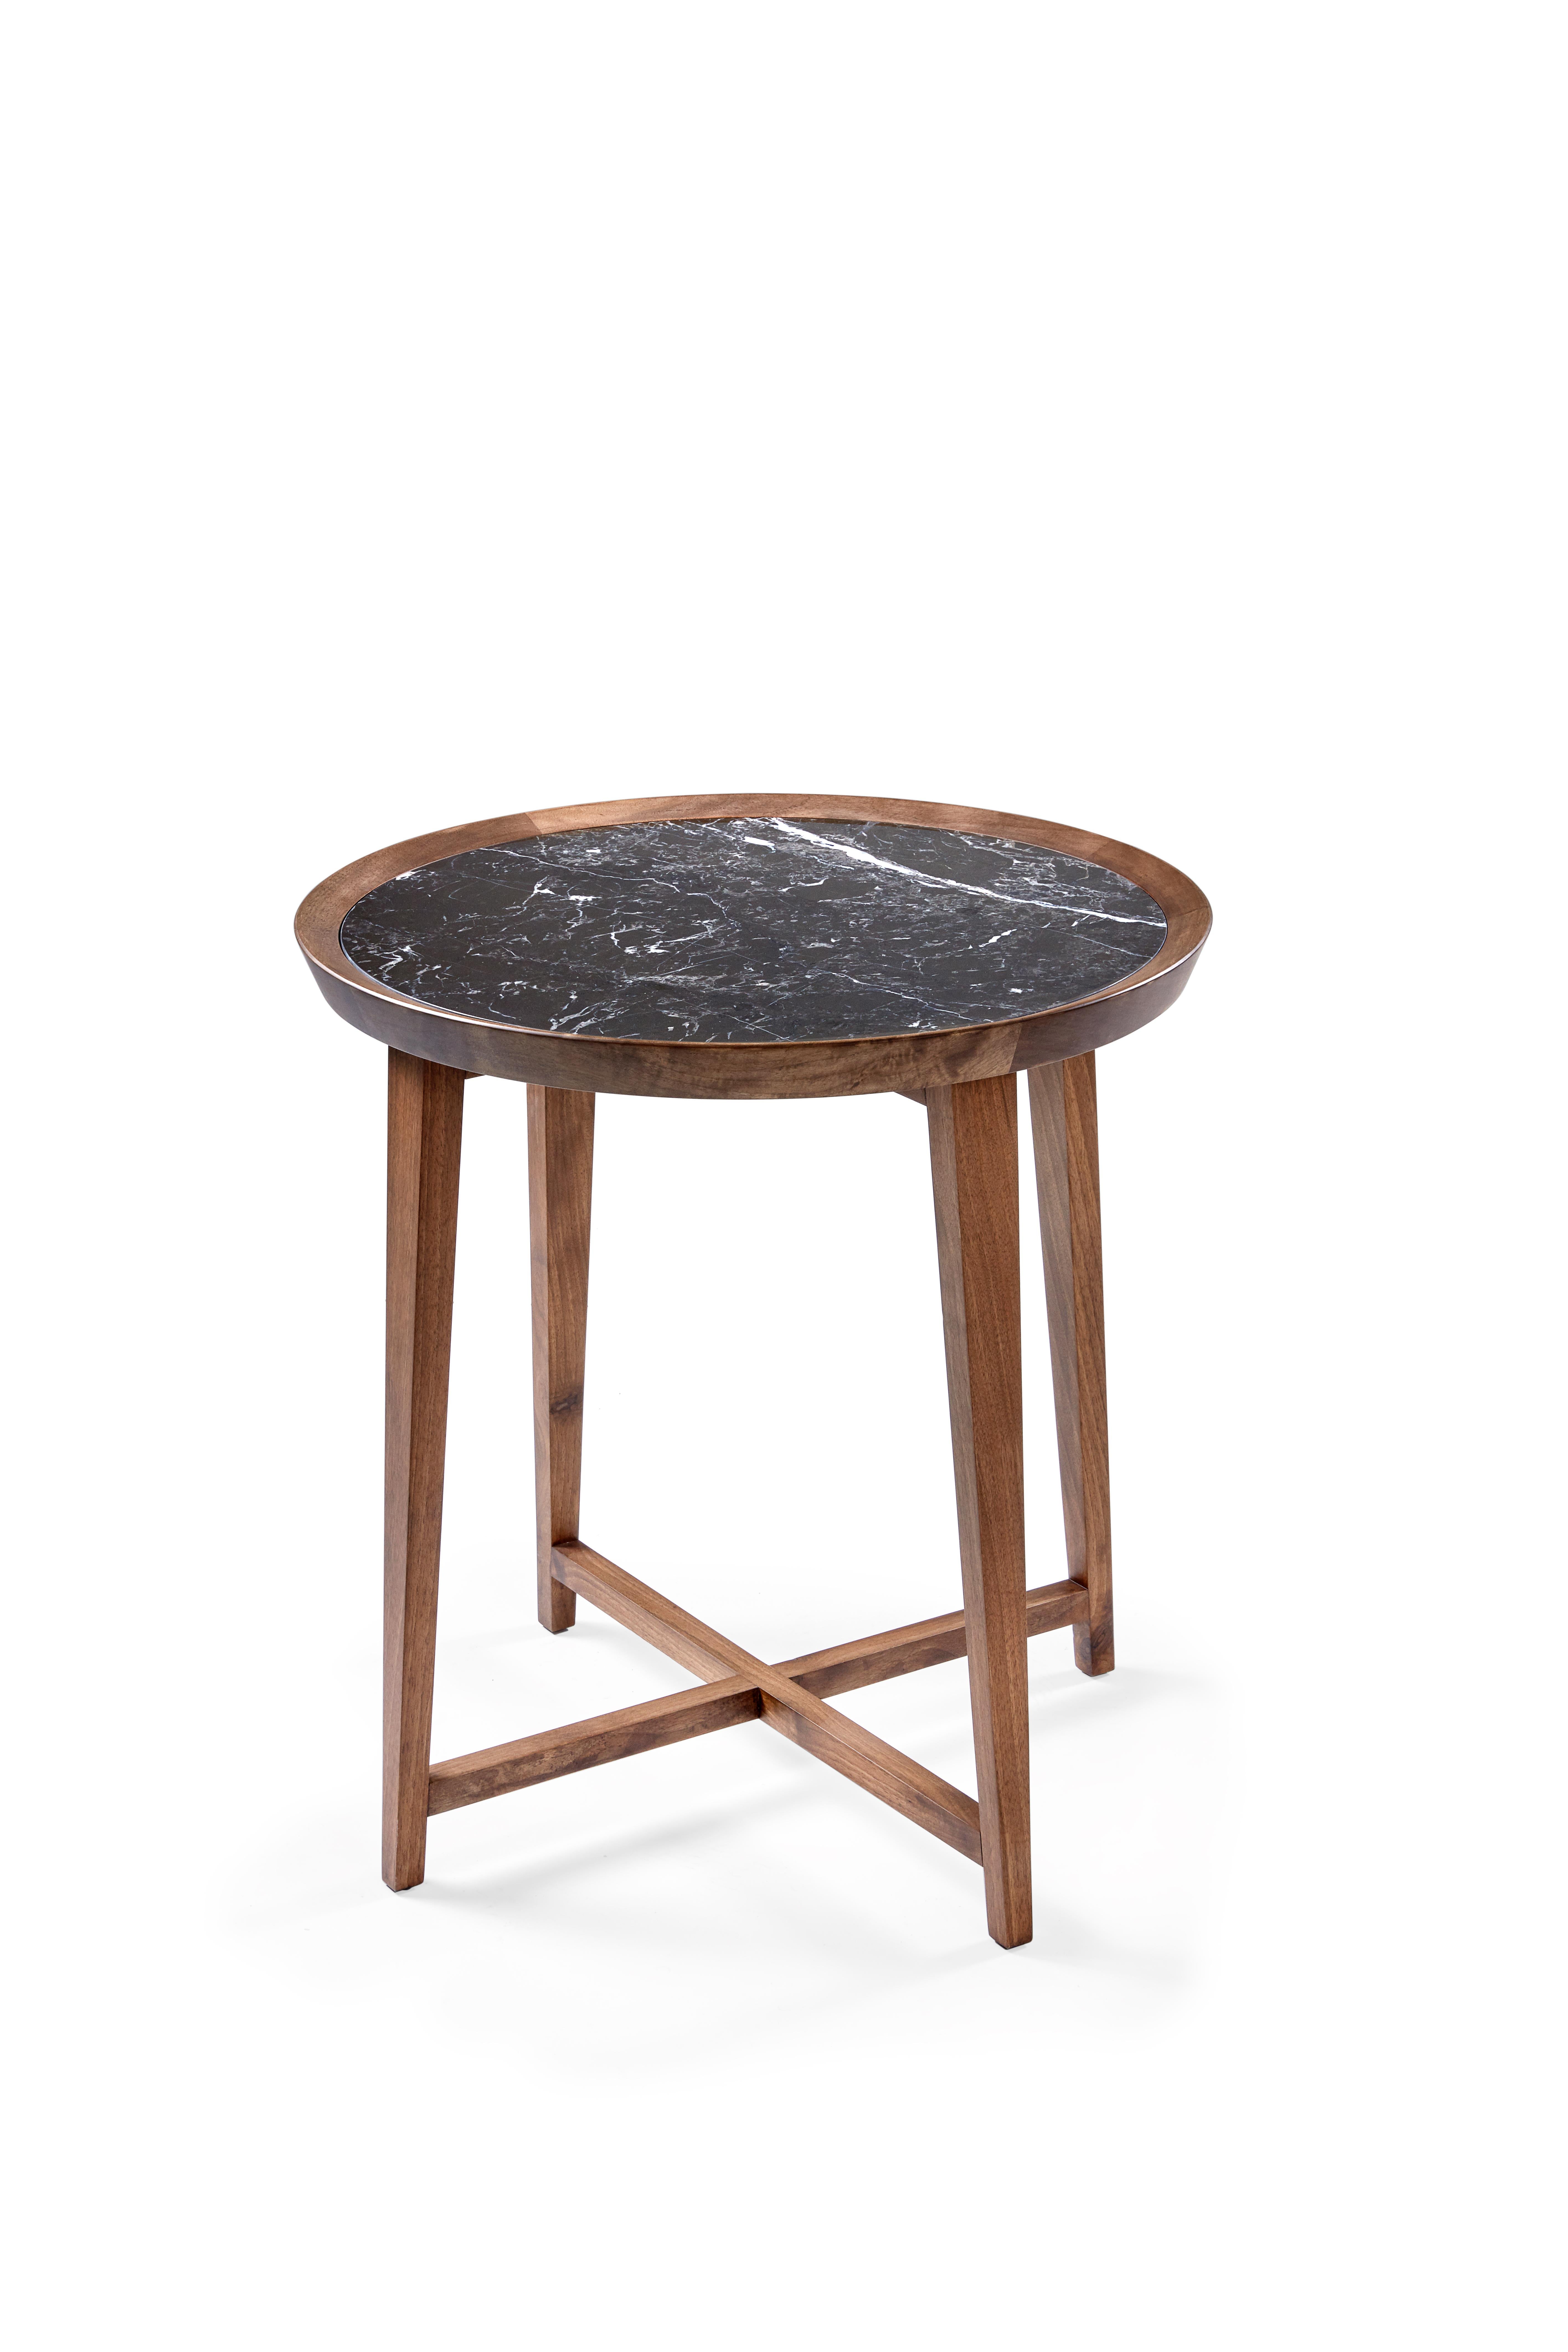 A set of three varying diameters and heights, the Opera table exemplifies simplicity in form and a focus on material. The marble inset tray top on X-frame wood base allow this piece to work with almost any style room.